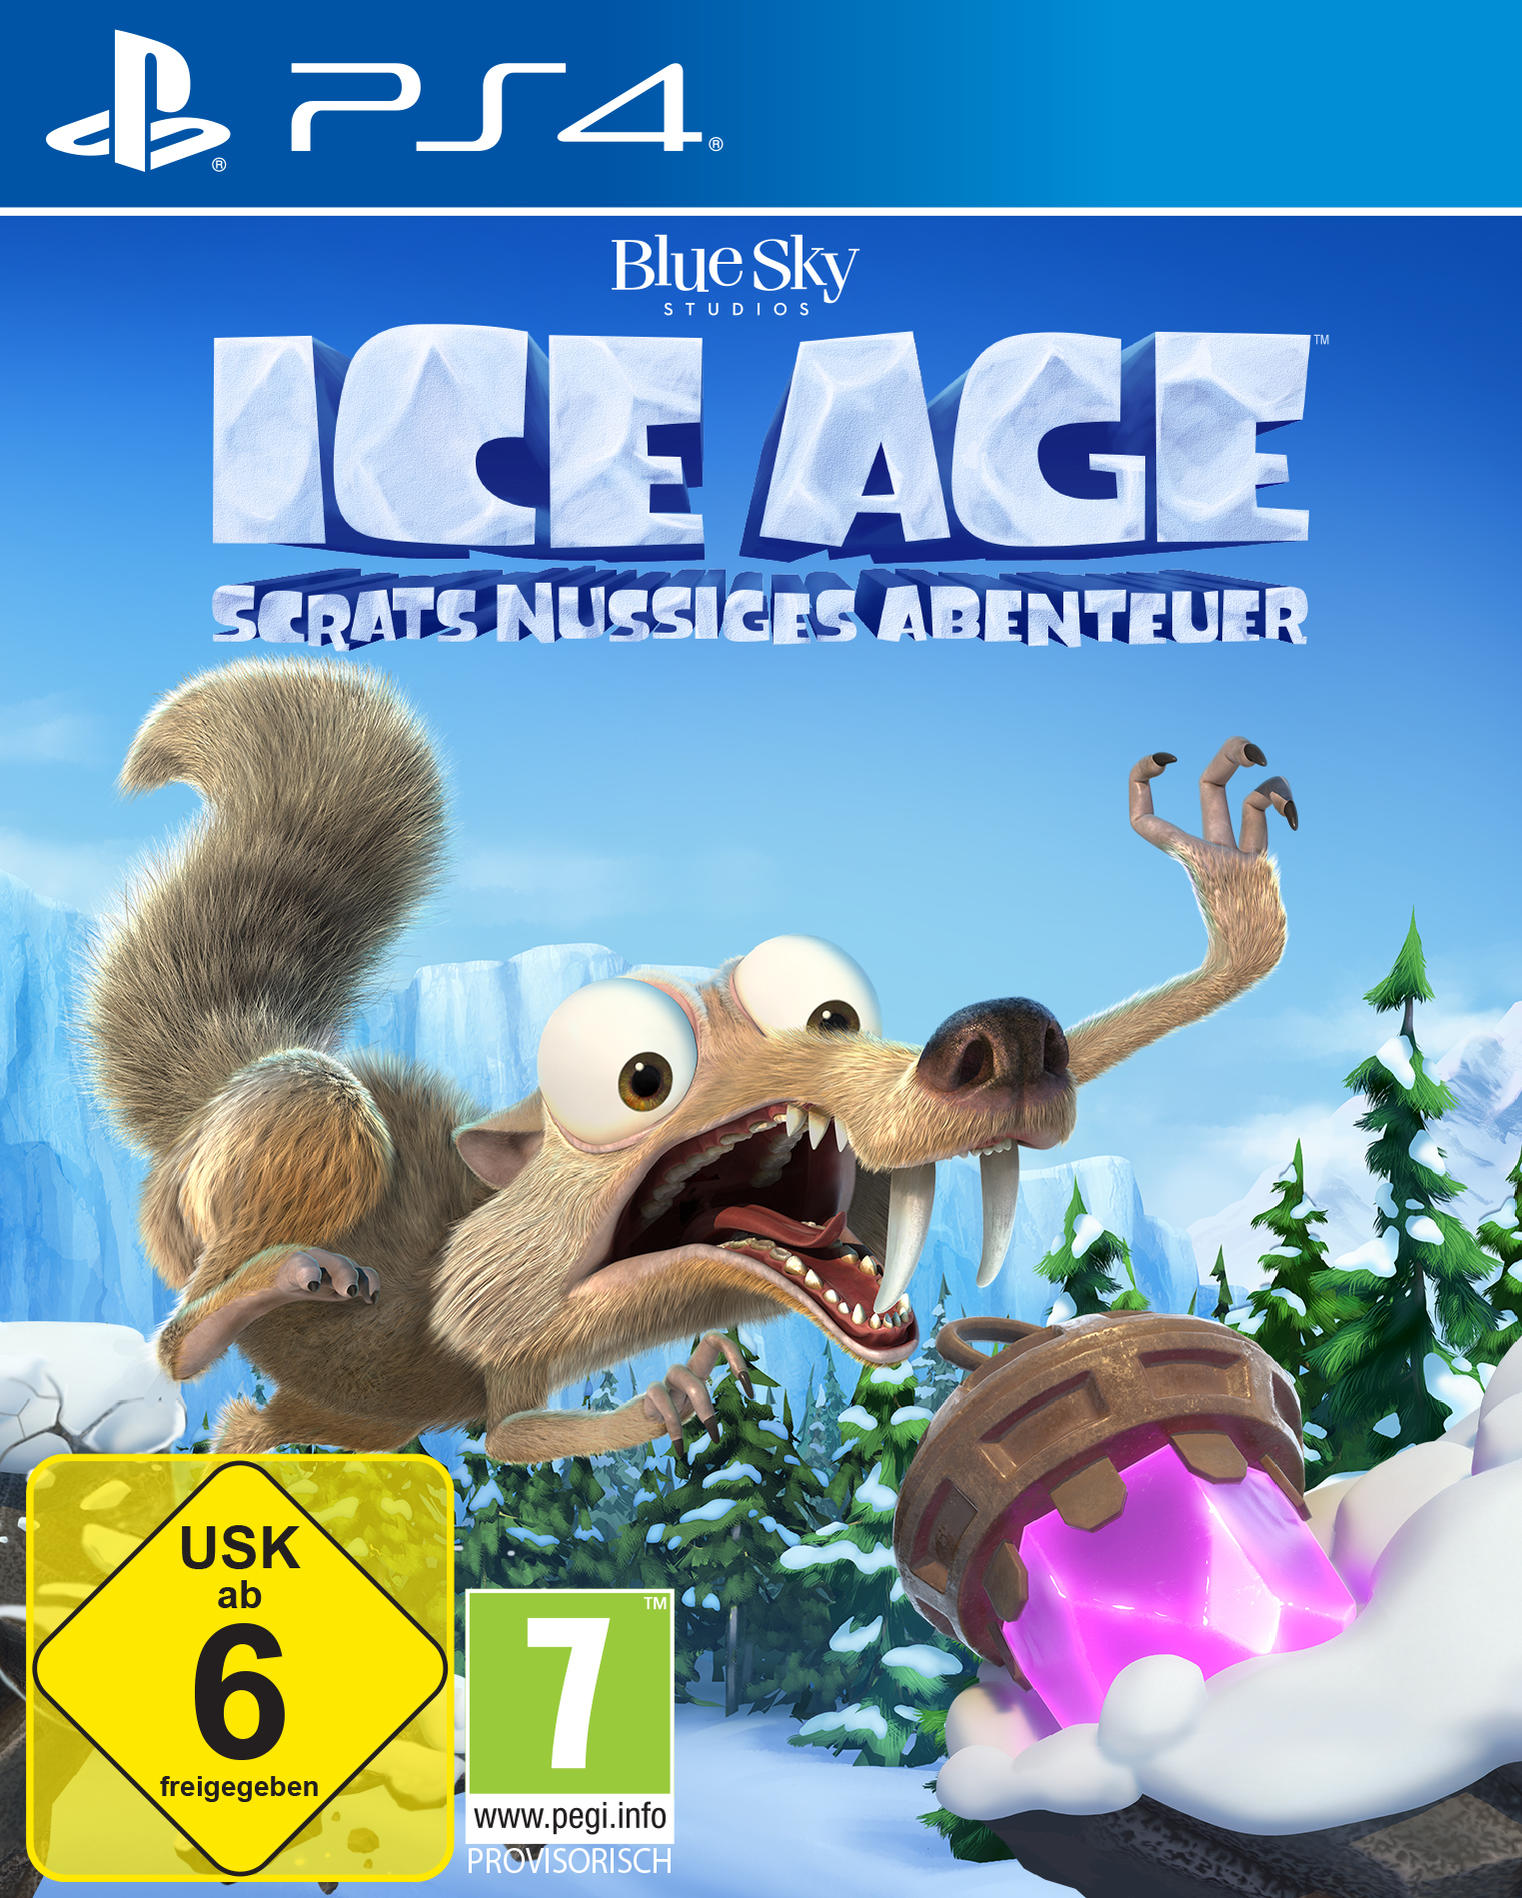 PS4 ICE AGE SCRATS NUSSIGES 4] - ABENTEUER [PlayStation